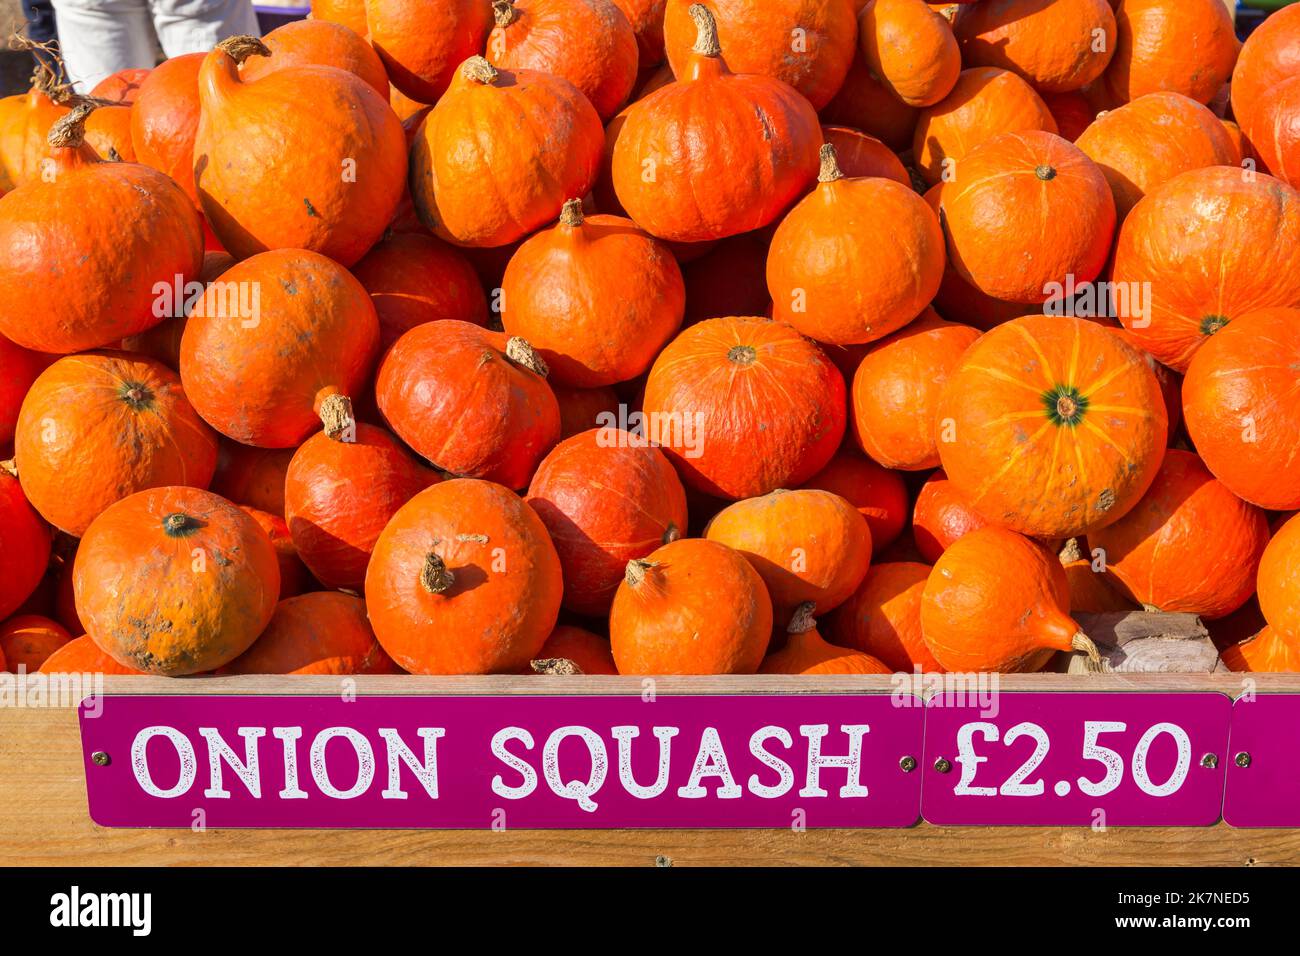 Pumpkin Time at Sunnyfields Farm in Totton, Hampshire UK in October as Halloween approaches - Onion Squash, Cucurbita maxima, for sale Stock Photo